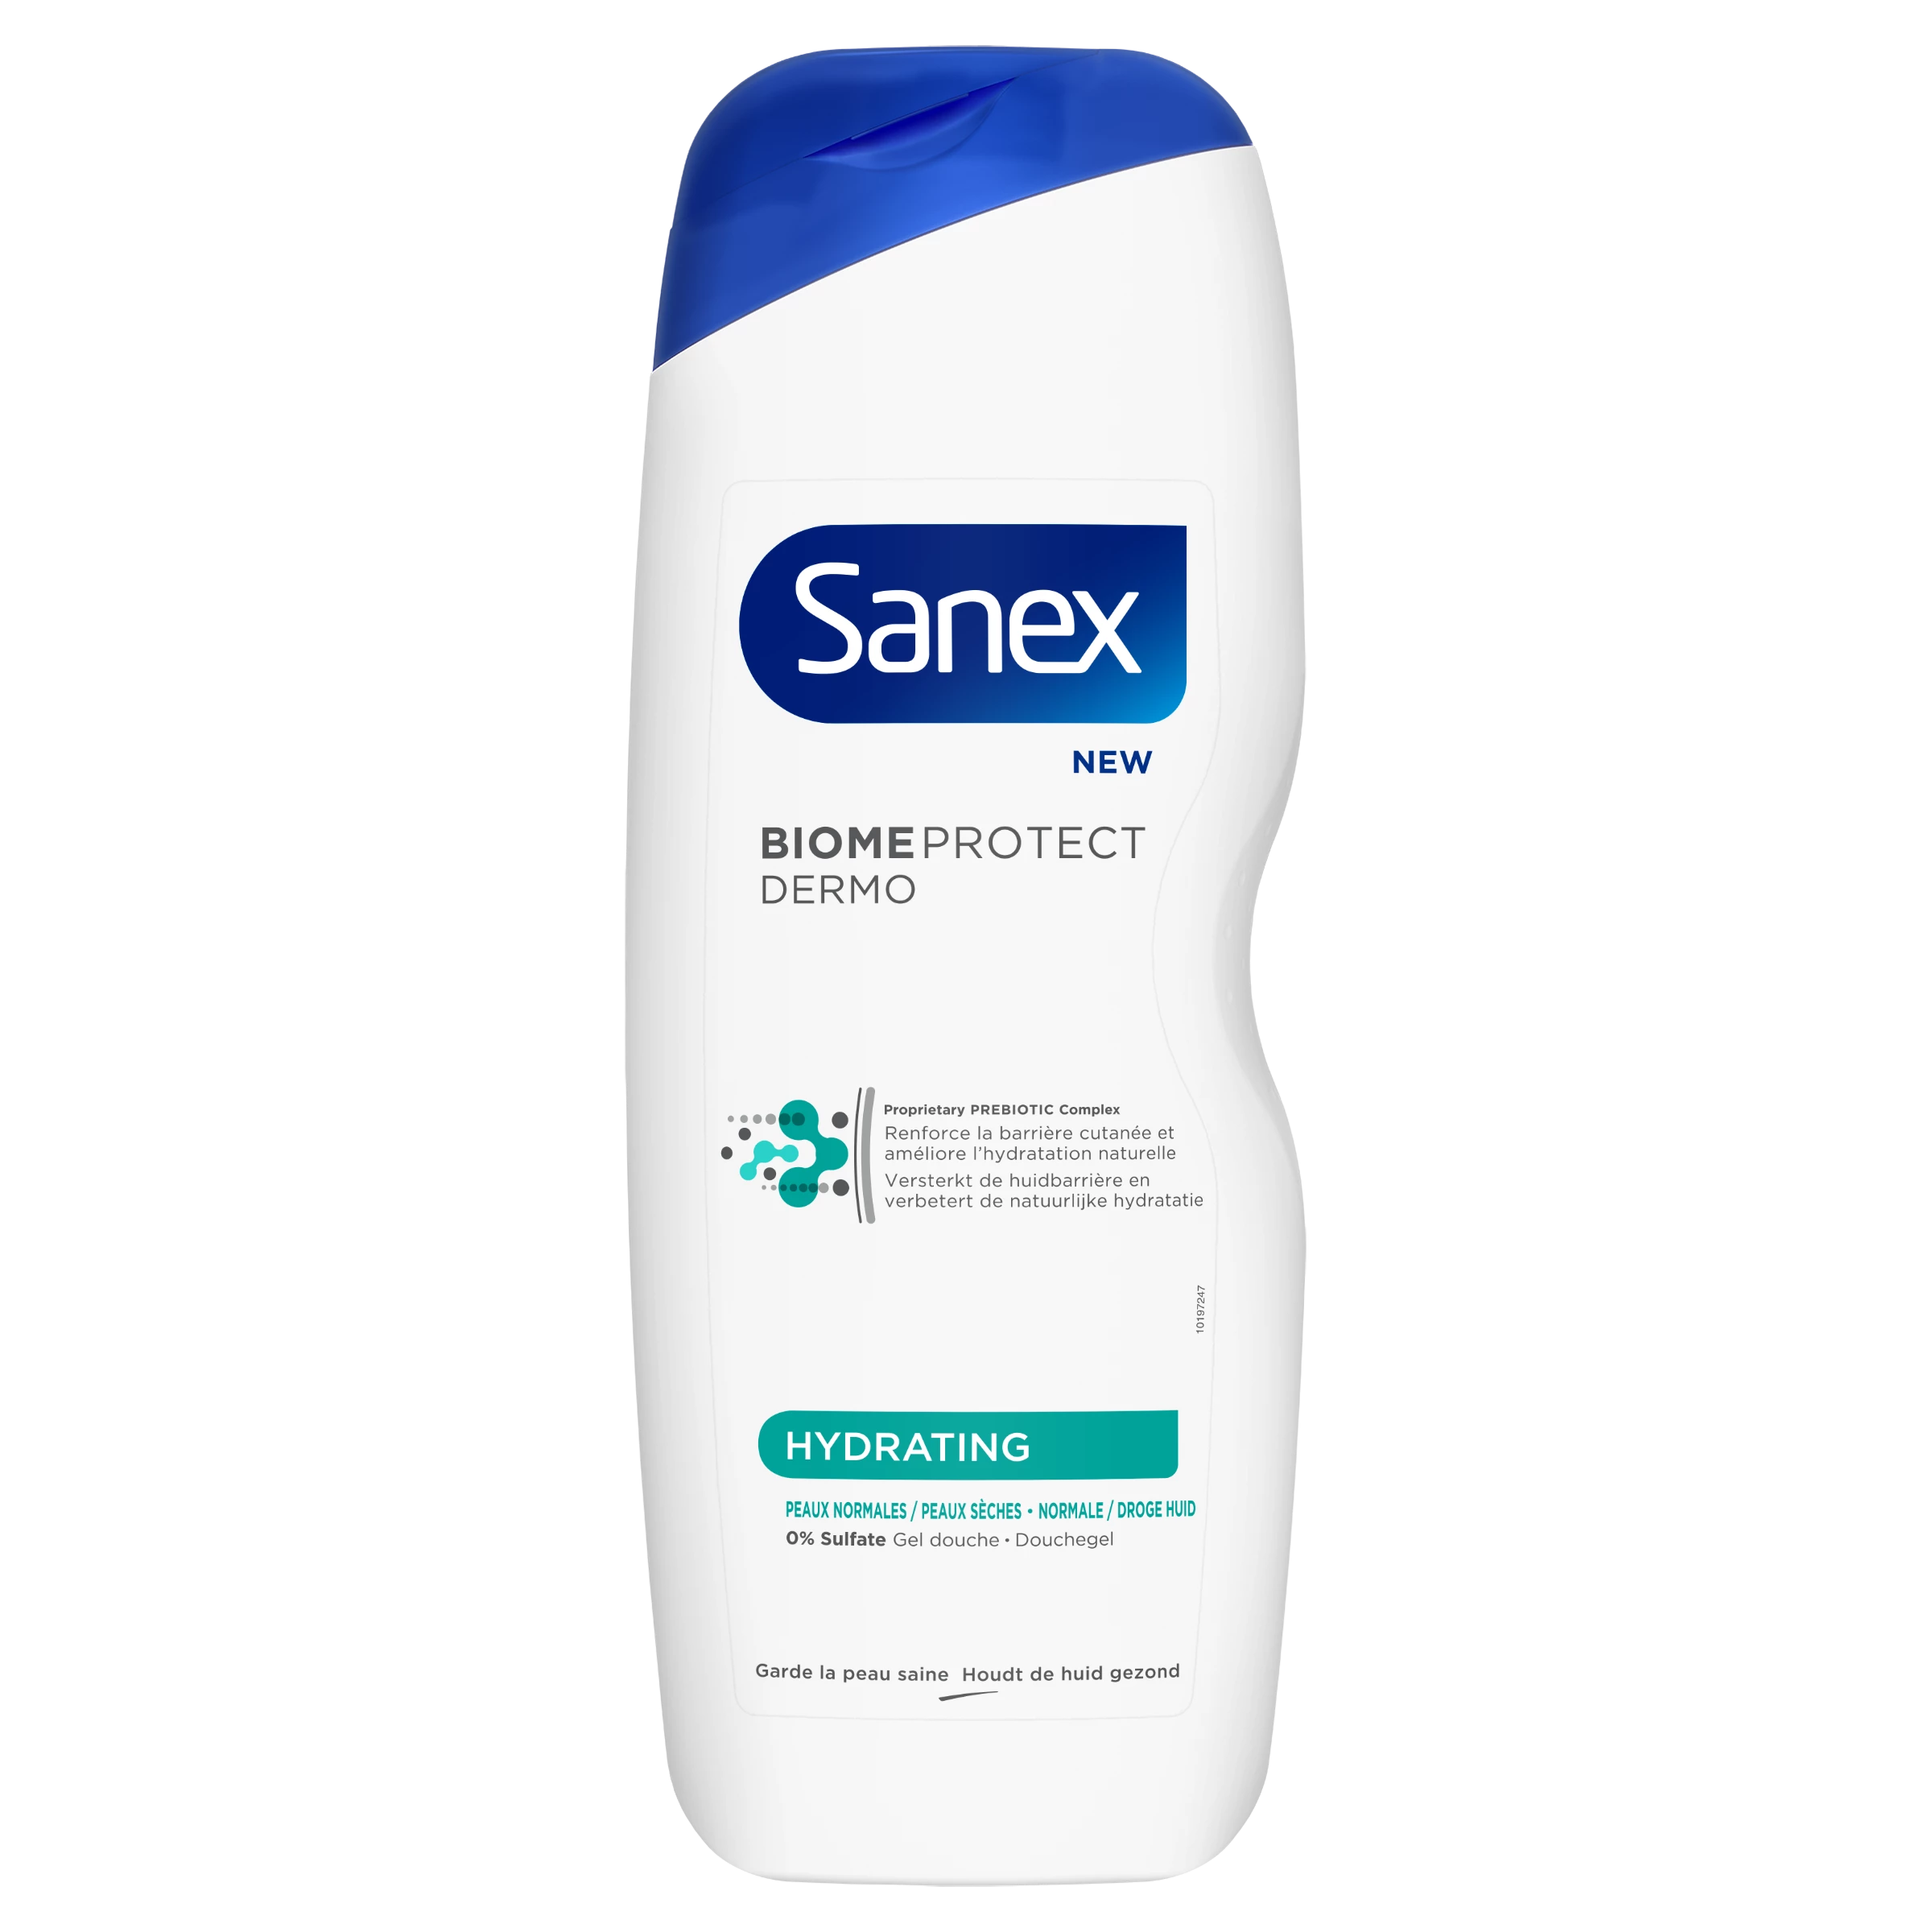 Sanex Biome Protect Hydrate 750m